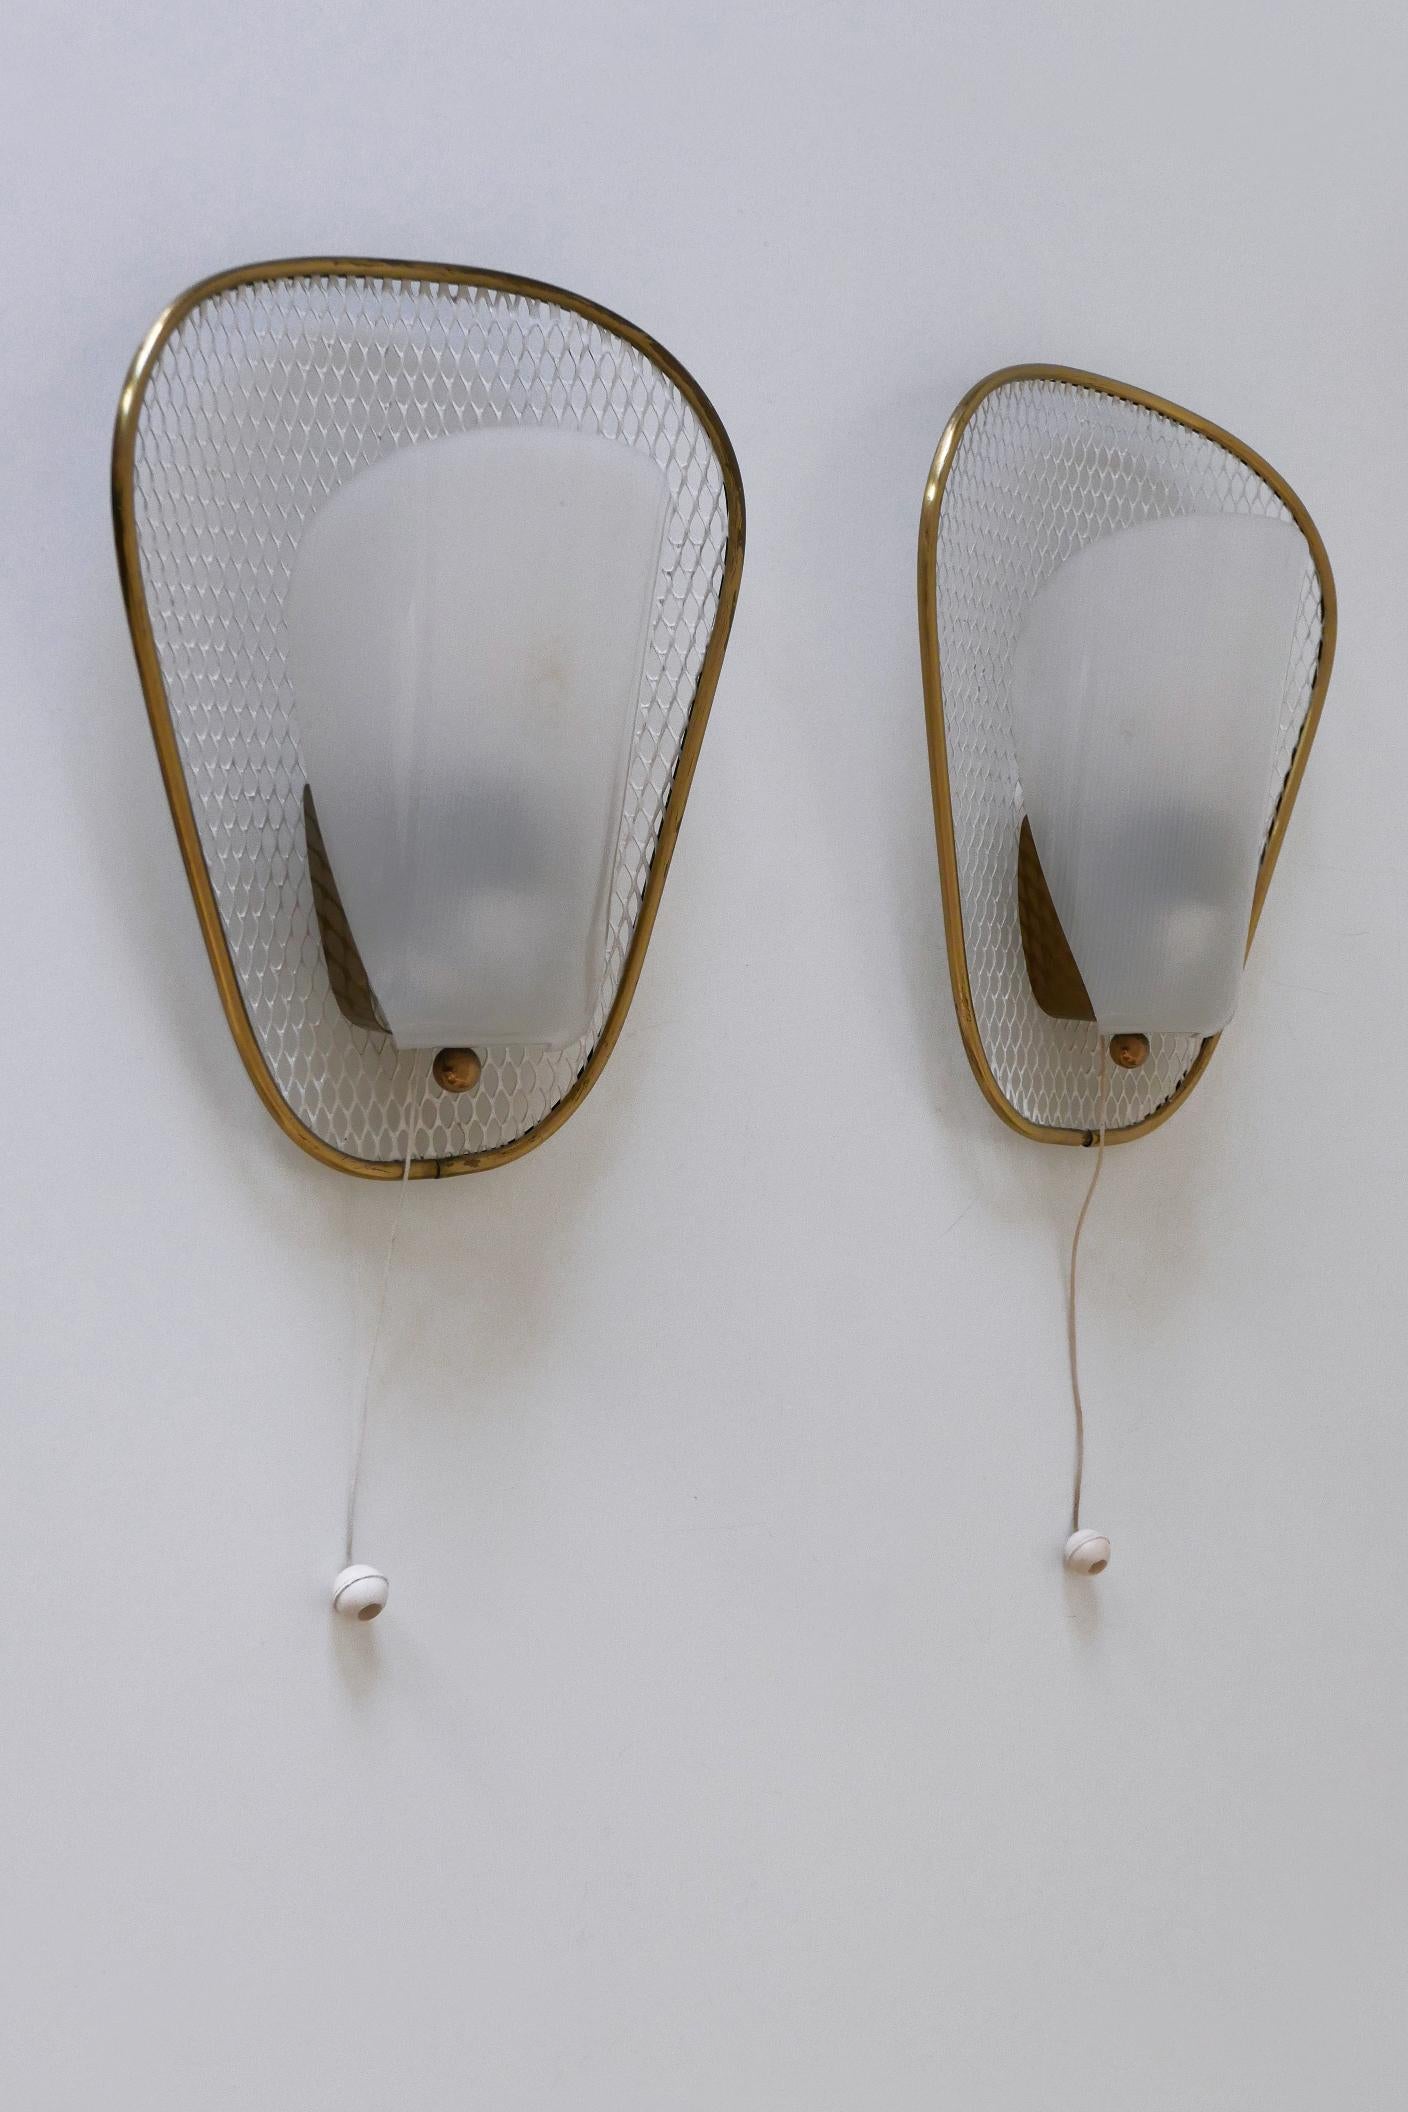 Set of Two Rare & Elegant Mid-Century Modern Sconces or Wall Lamps Germany 1950s For Sale 7